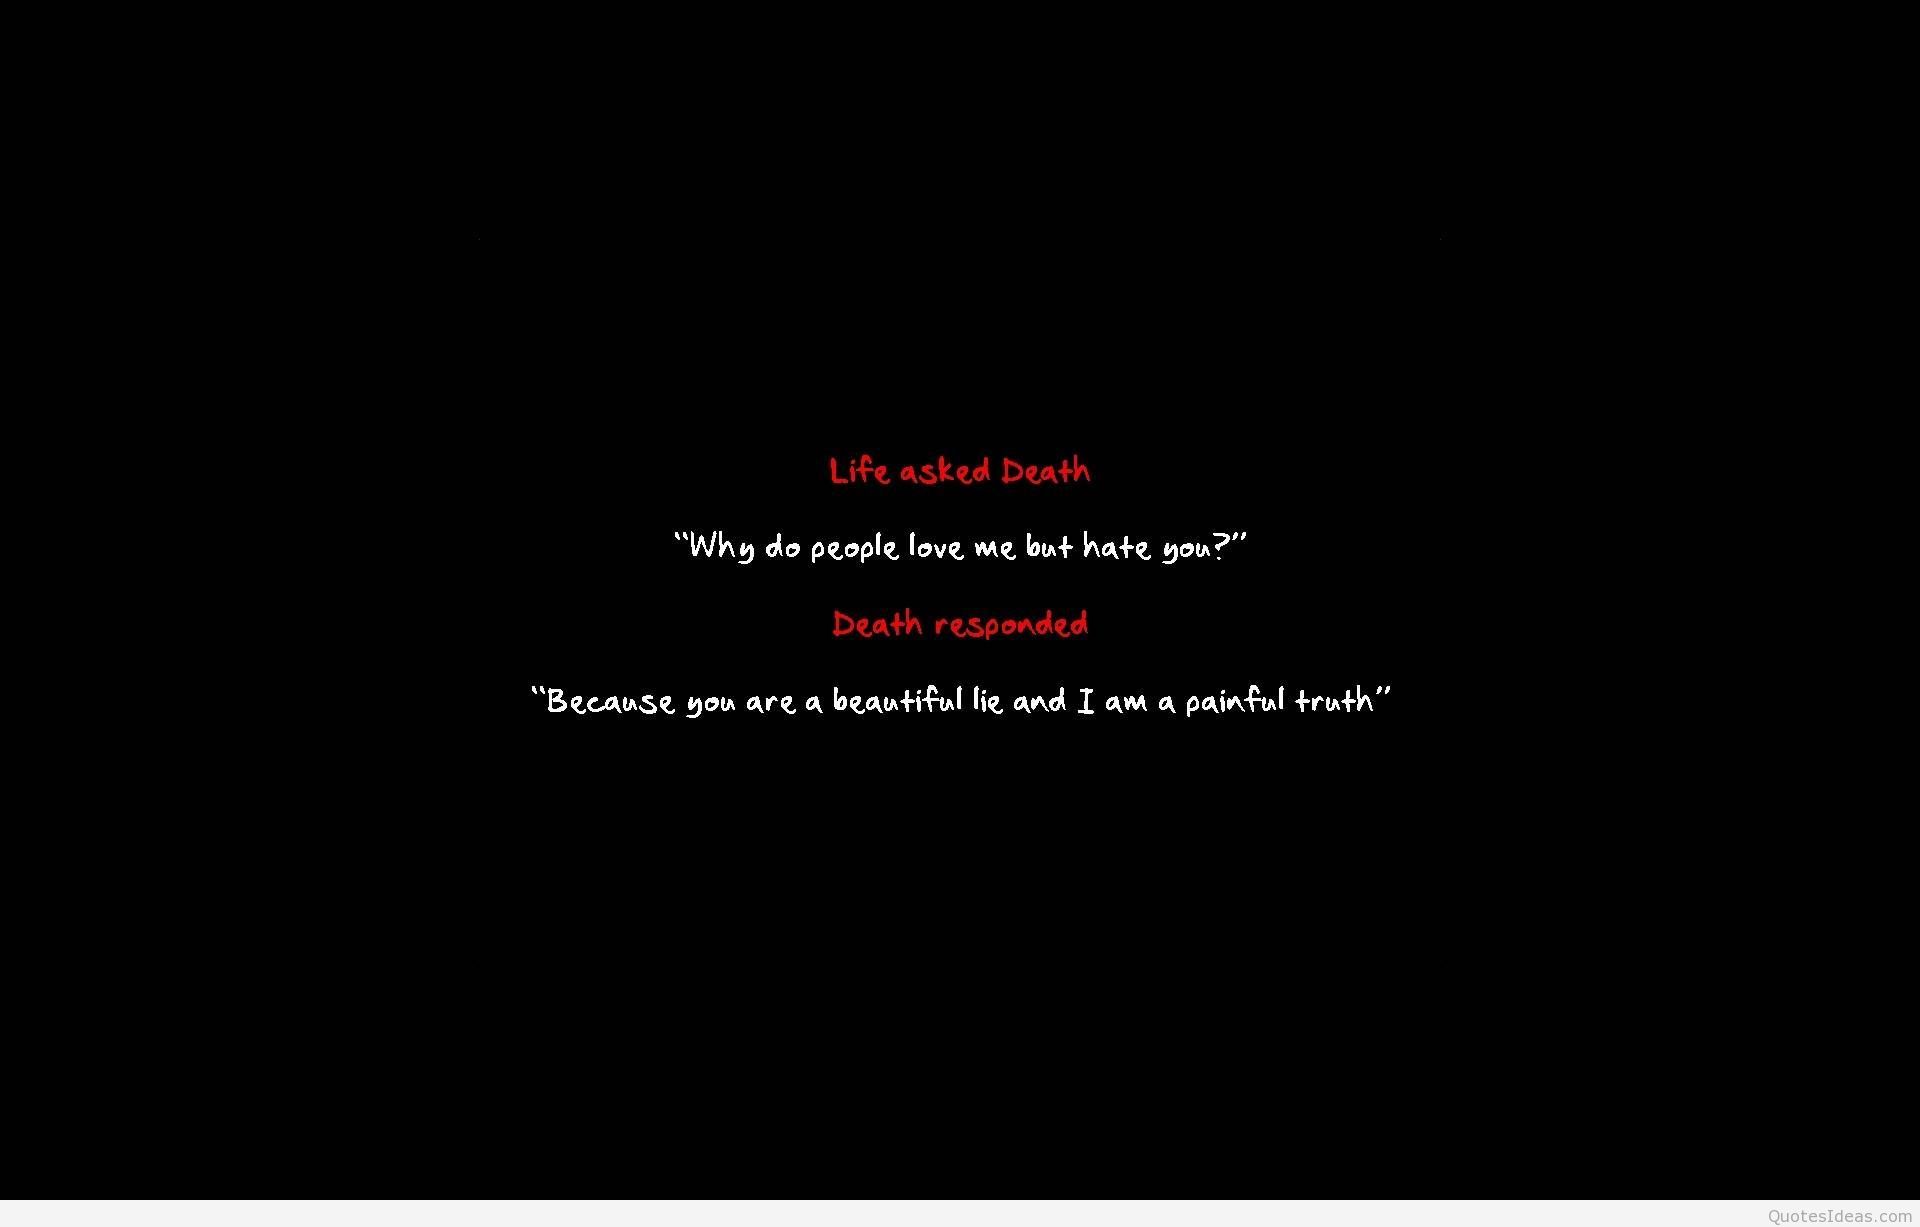 Life asked Death quotes